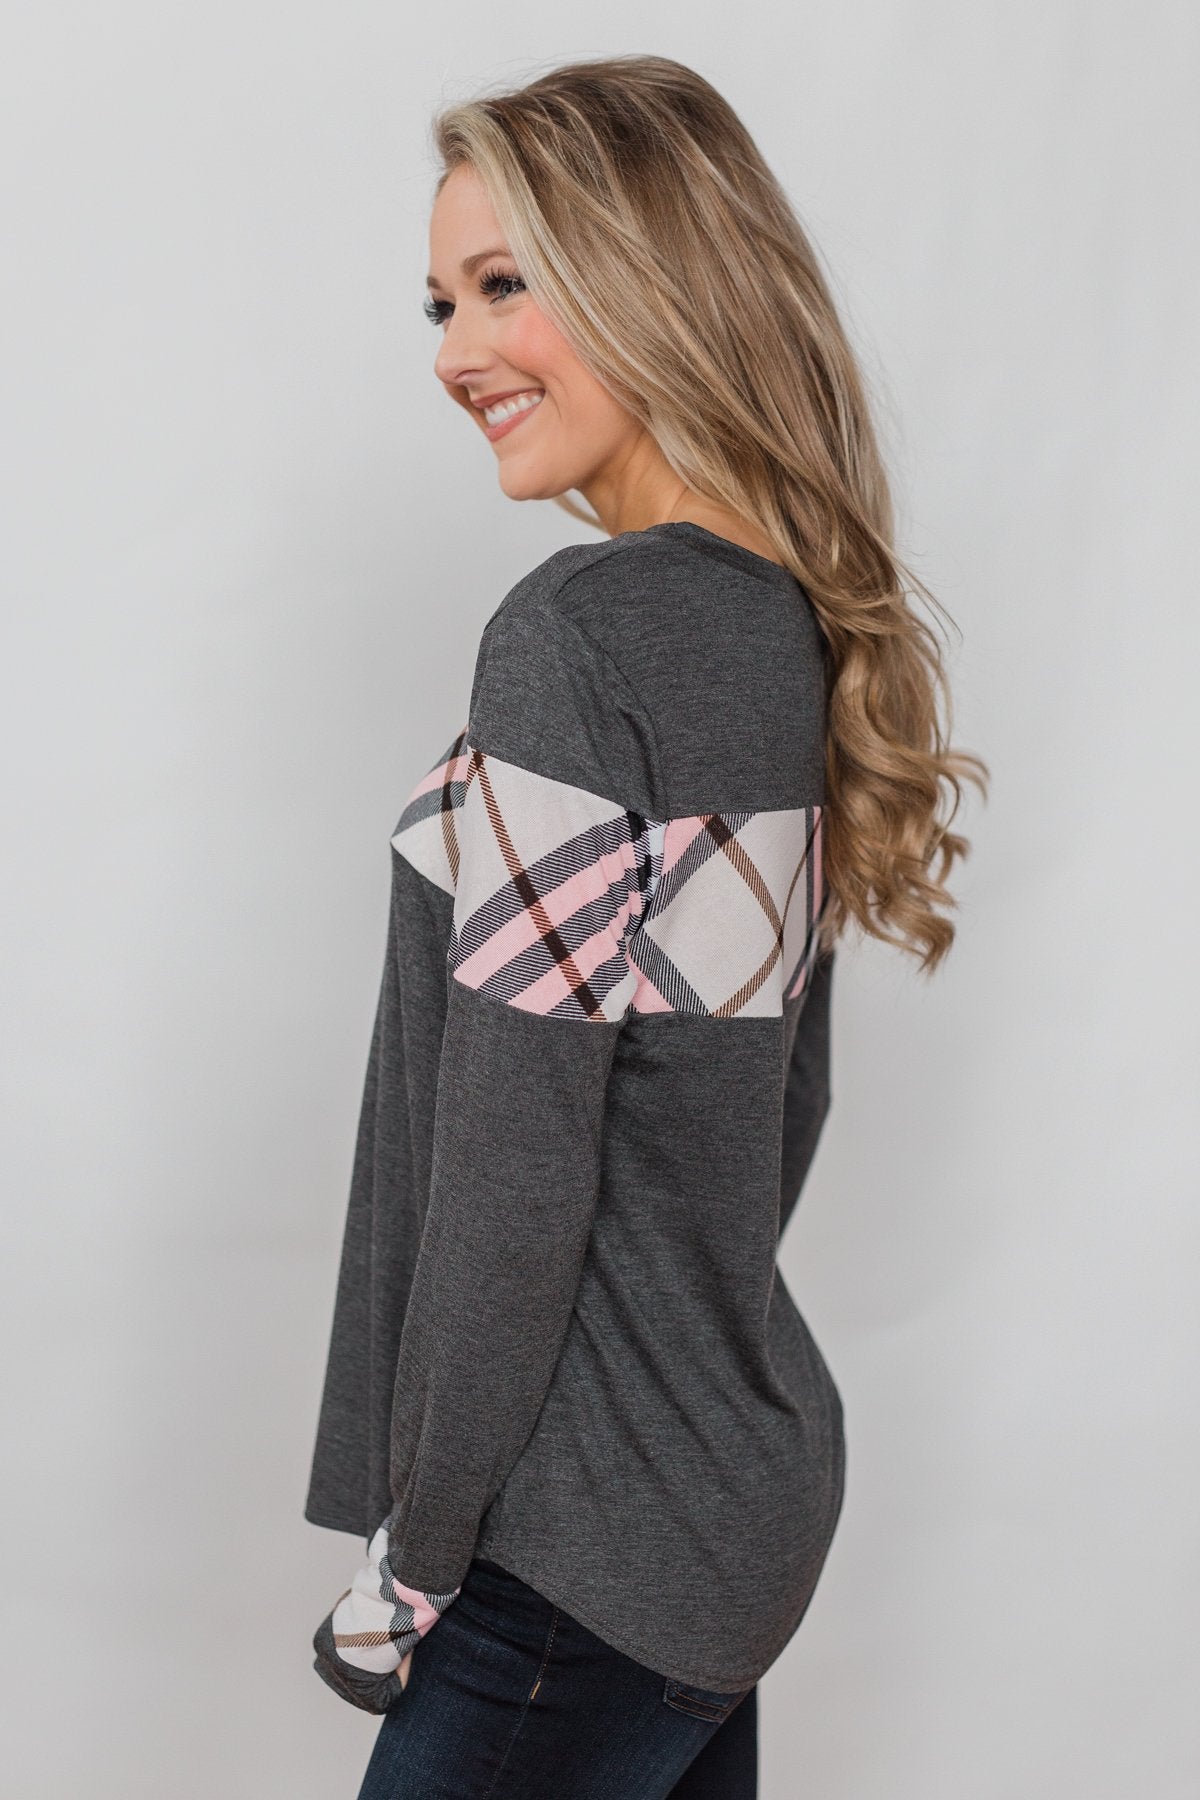 Talk About Cute Plaid Top- Charcoal